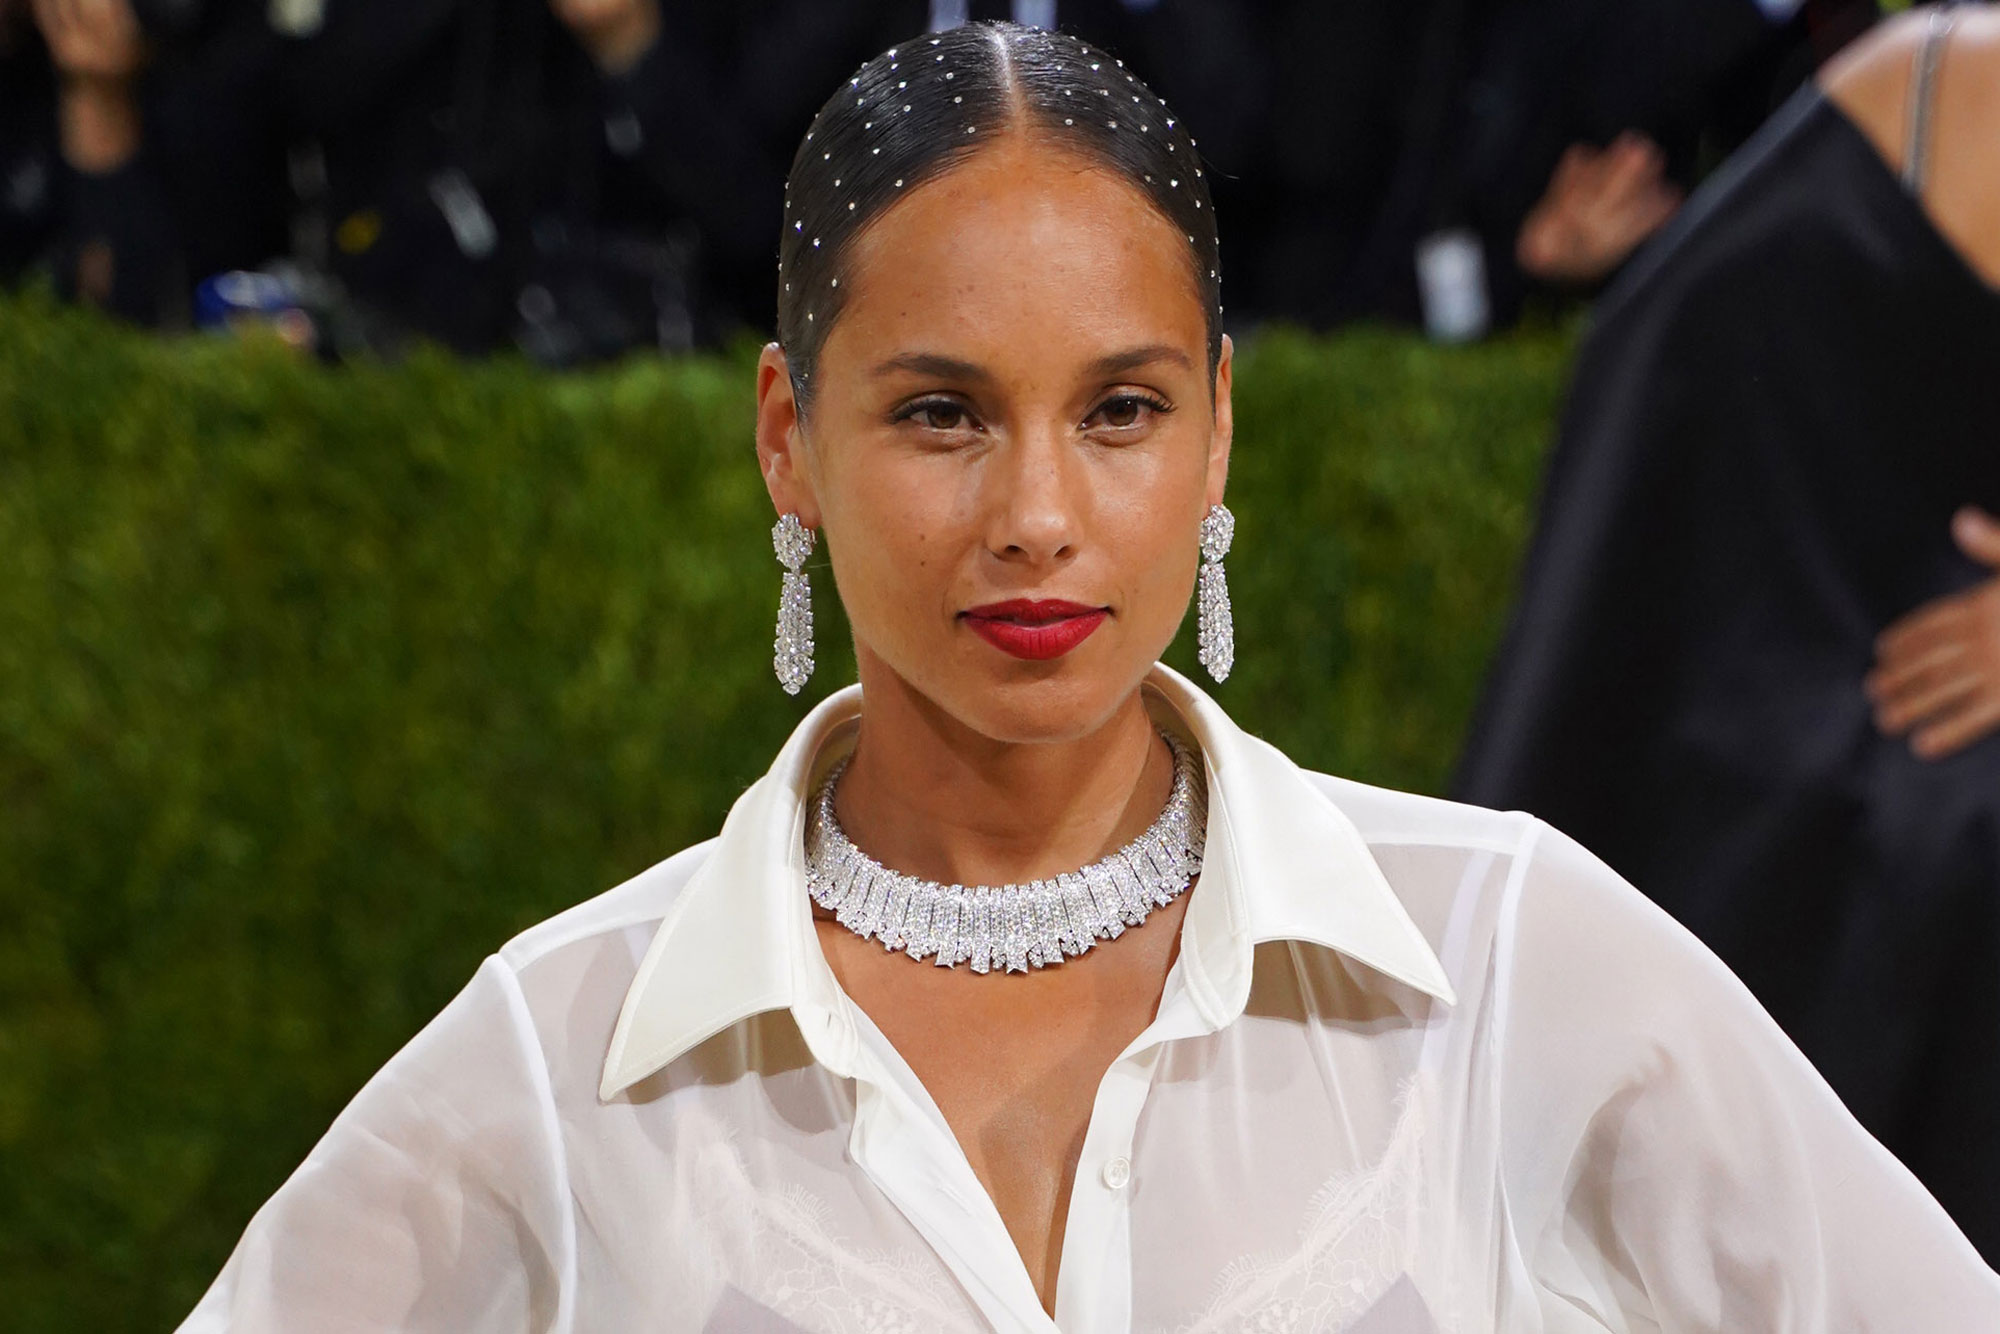 Alicia Keys attends 2021 Costume Institute Benefit - In America: A Lexicon of Fashion at the Metropolitan Museum of Art on September 13, 2021 in New York City.